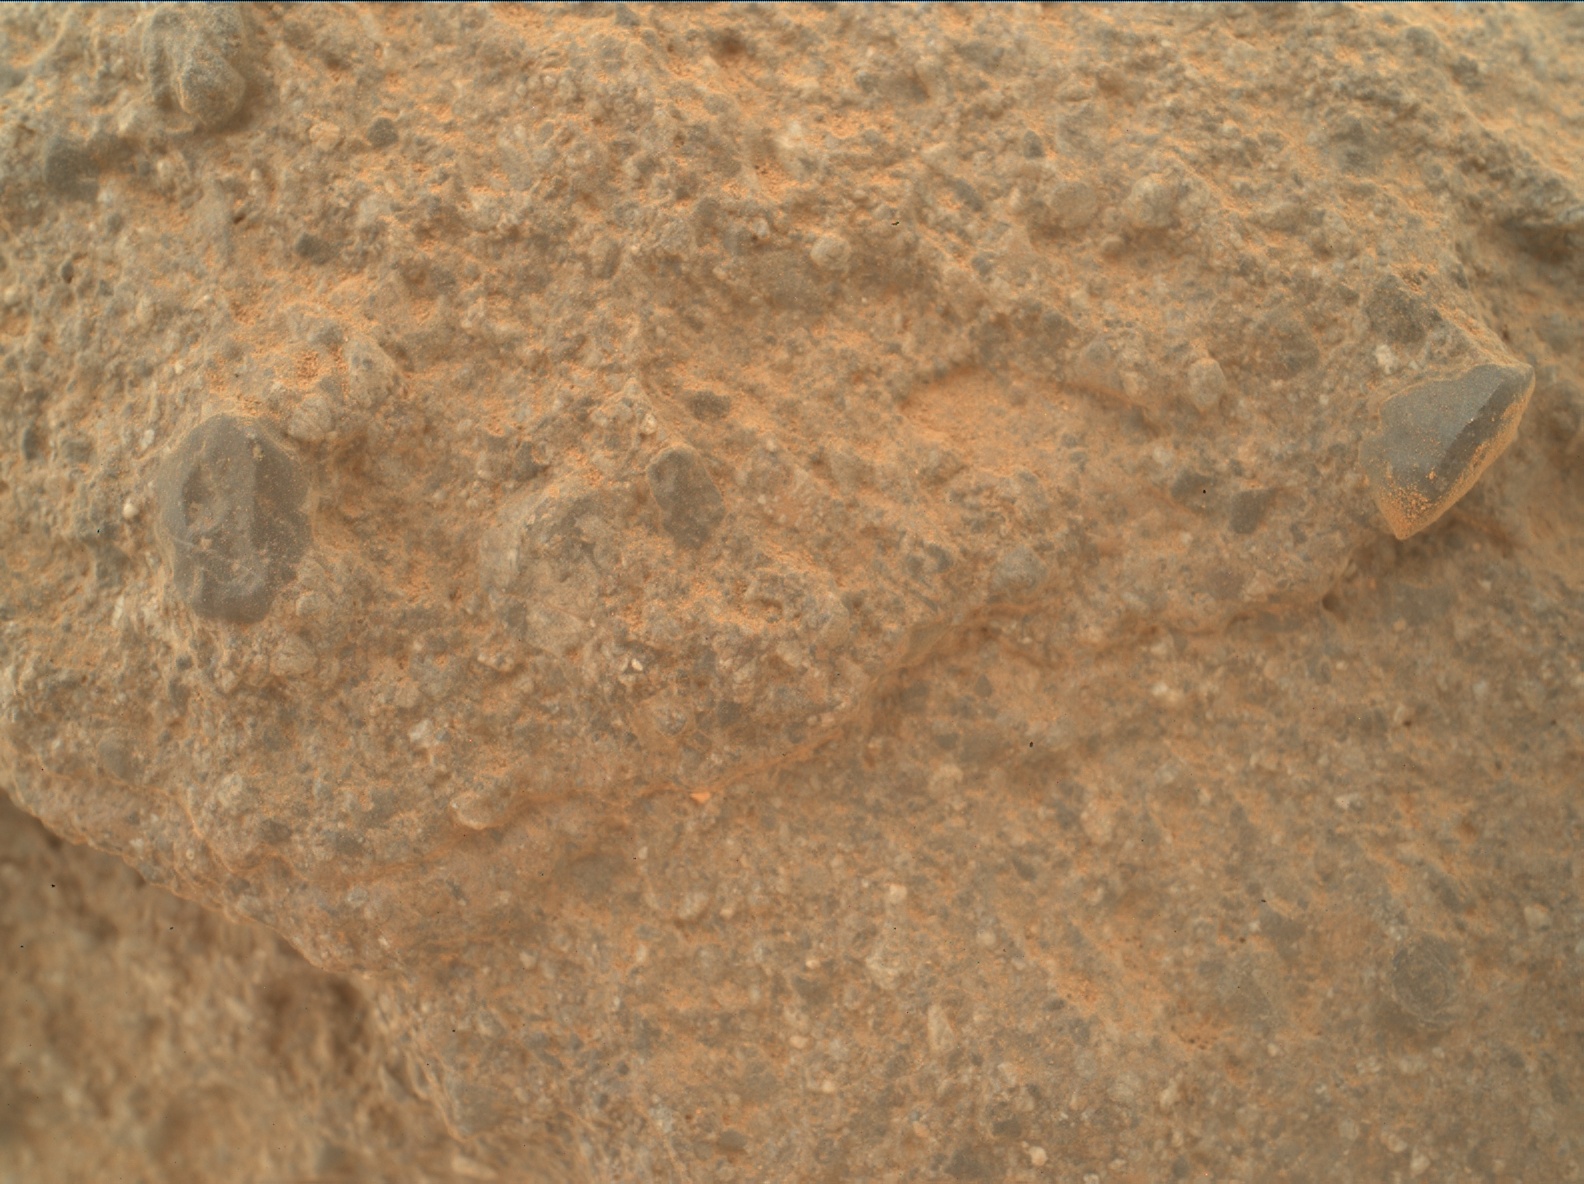 Nasa's Mars rover Curiosity acquired this image using its Mars Hand Lens Imager (MAHLI) on Sol 394